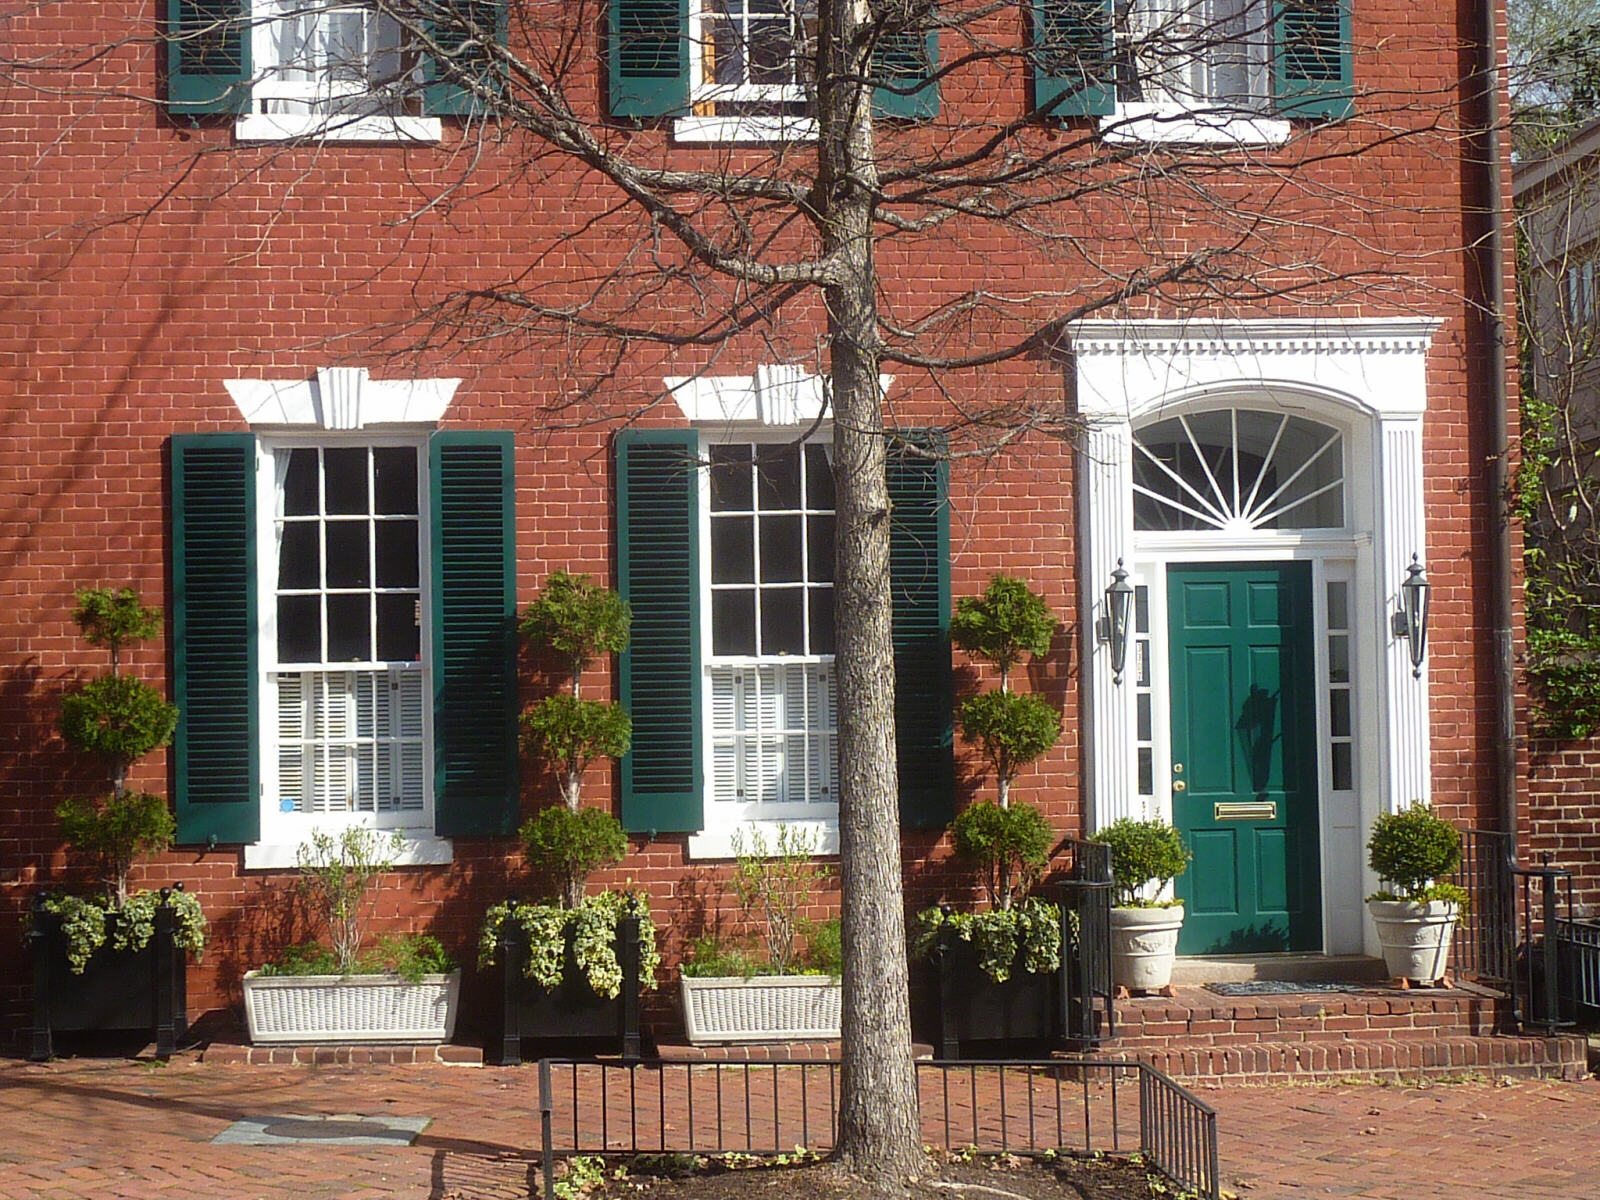 3017 N Street in Georgetown, where the Kennedys lived